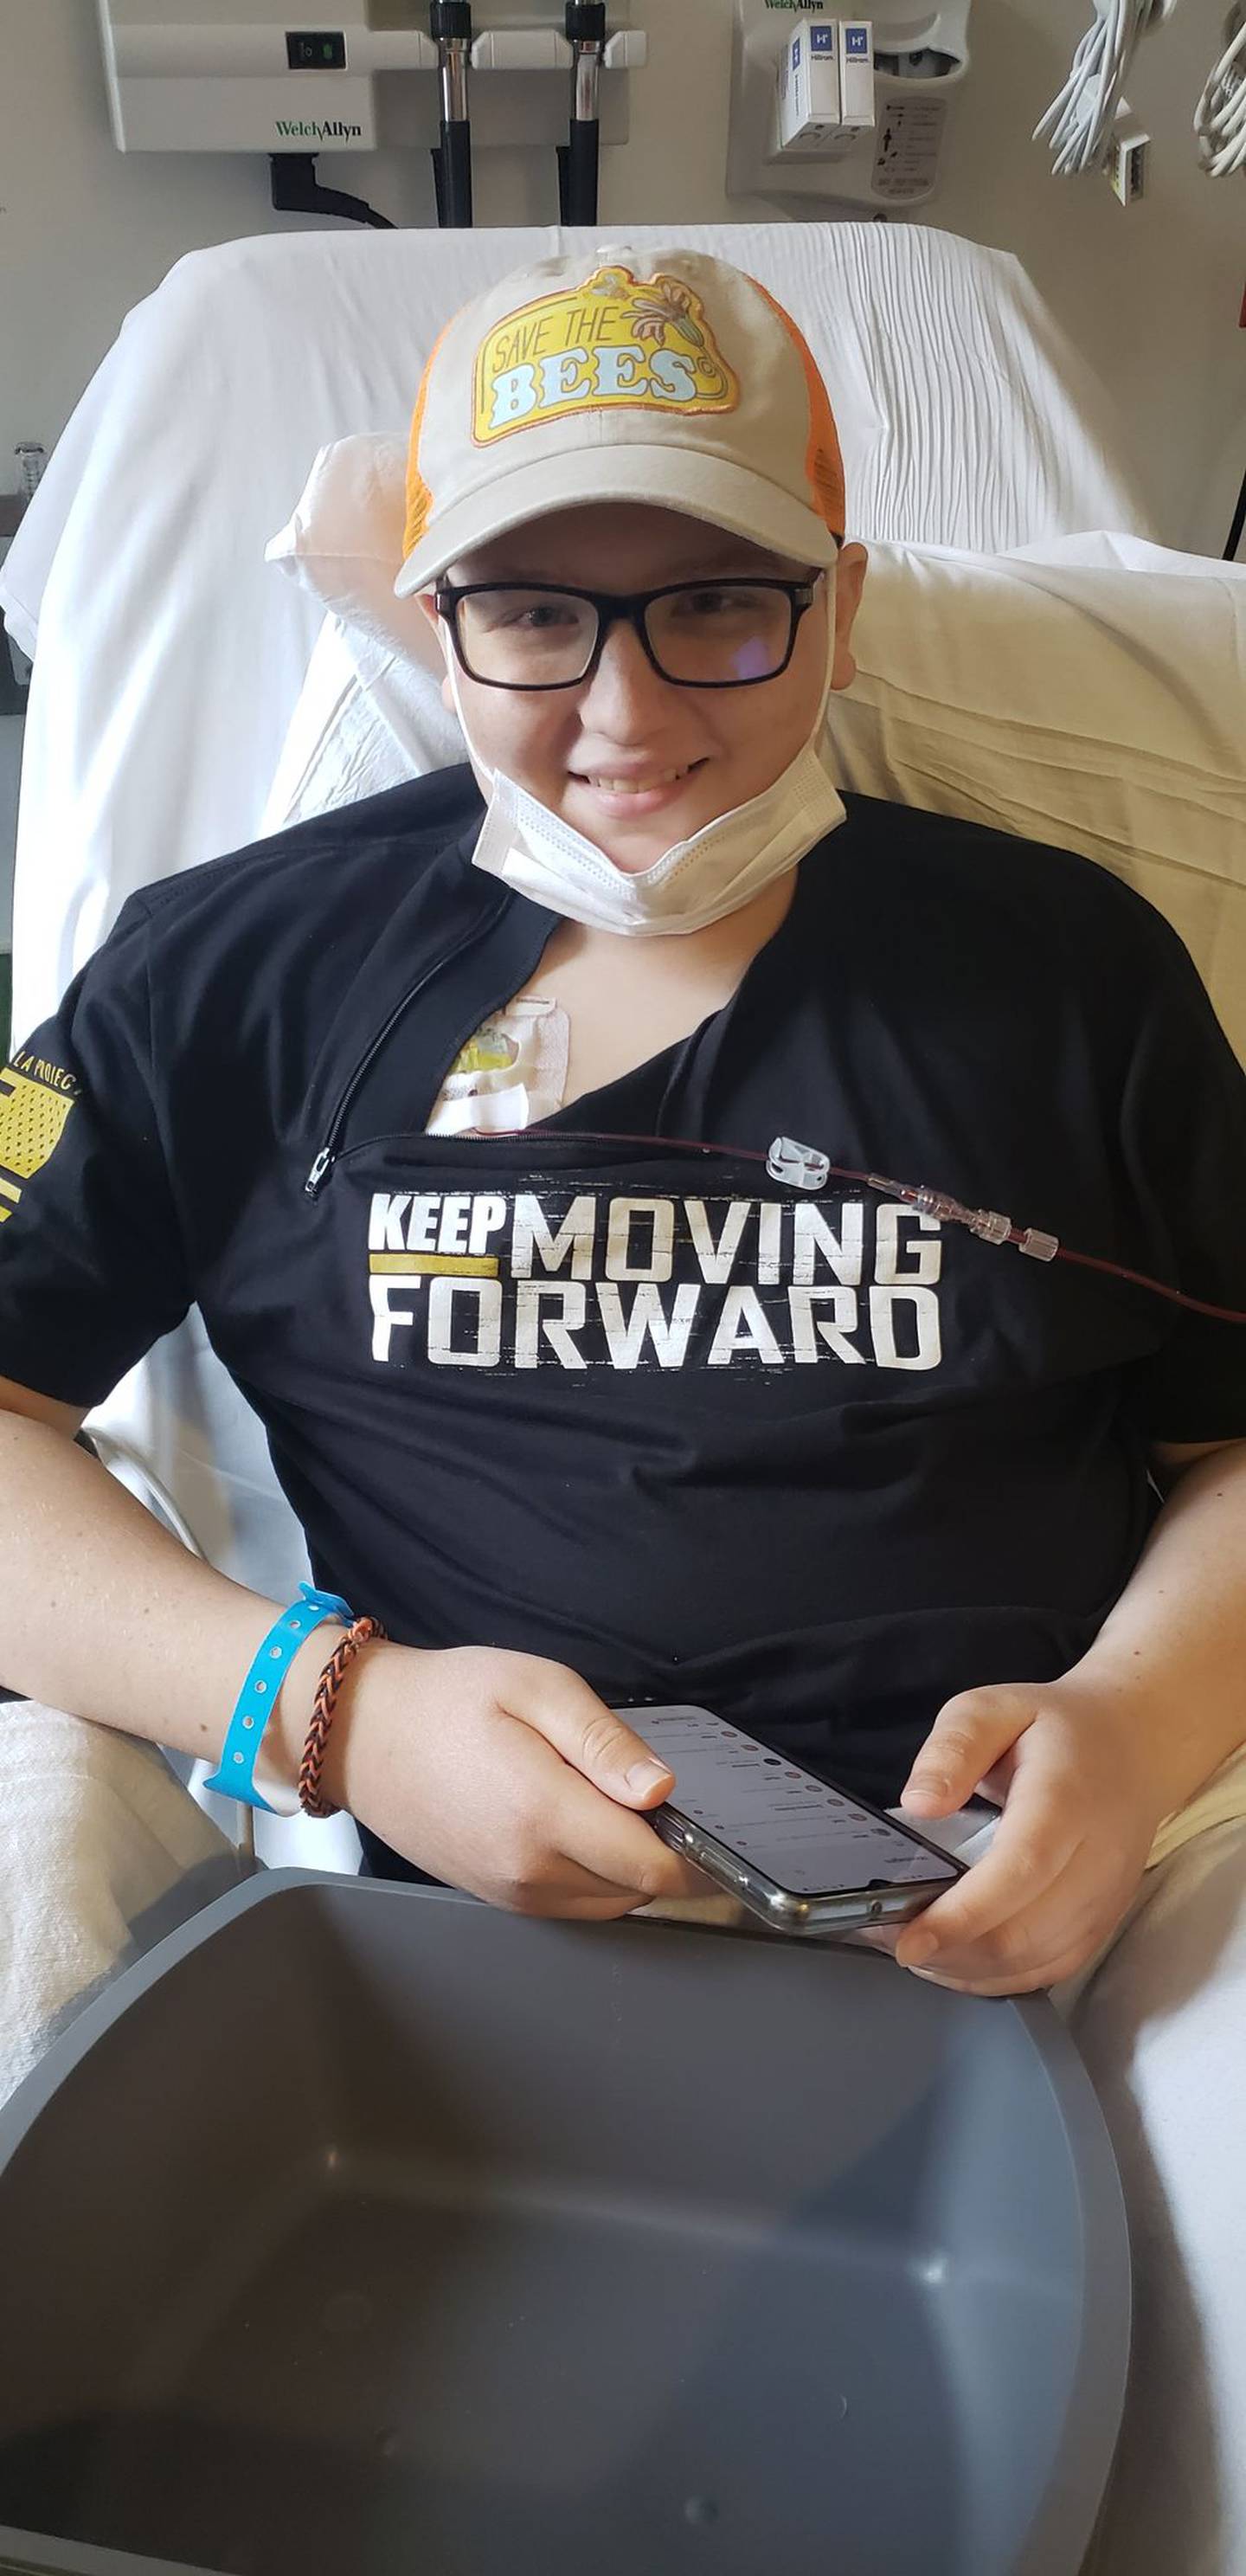 Vinnie Gincauskas, 15, of Lockport, has a rare soft tissue cancer called desmoplastic small round cell tumors or DSRCT. The cancer is aggressive but so is his treatment. “Benefit for Vinnie's Voyage” will be held 4 to 11 p.m. Friday, June 10, 2022, at the Lockport American Legion.